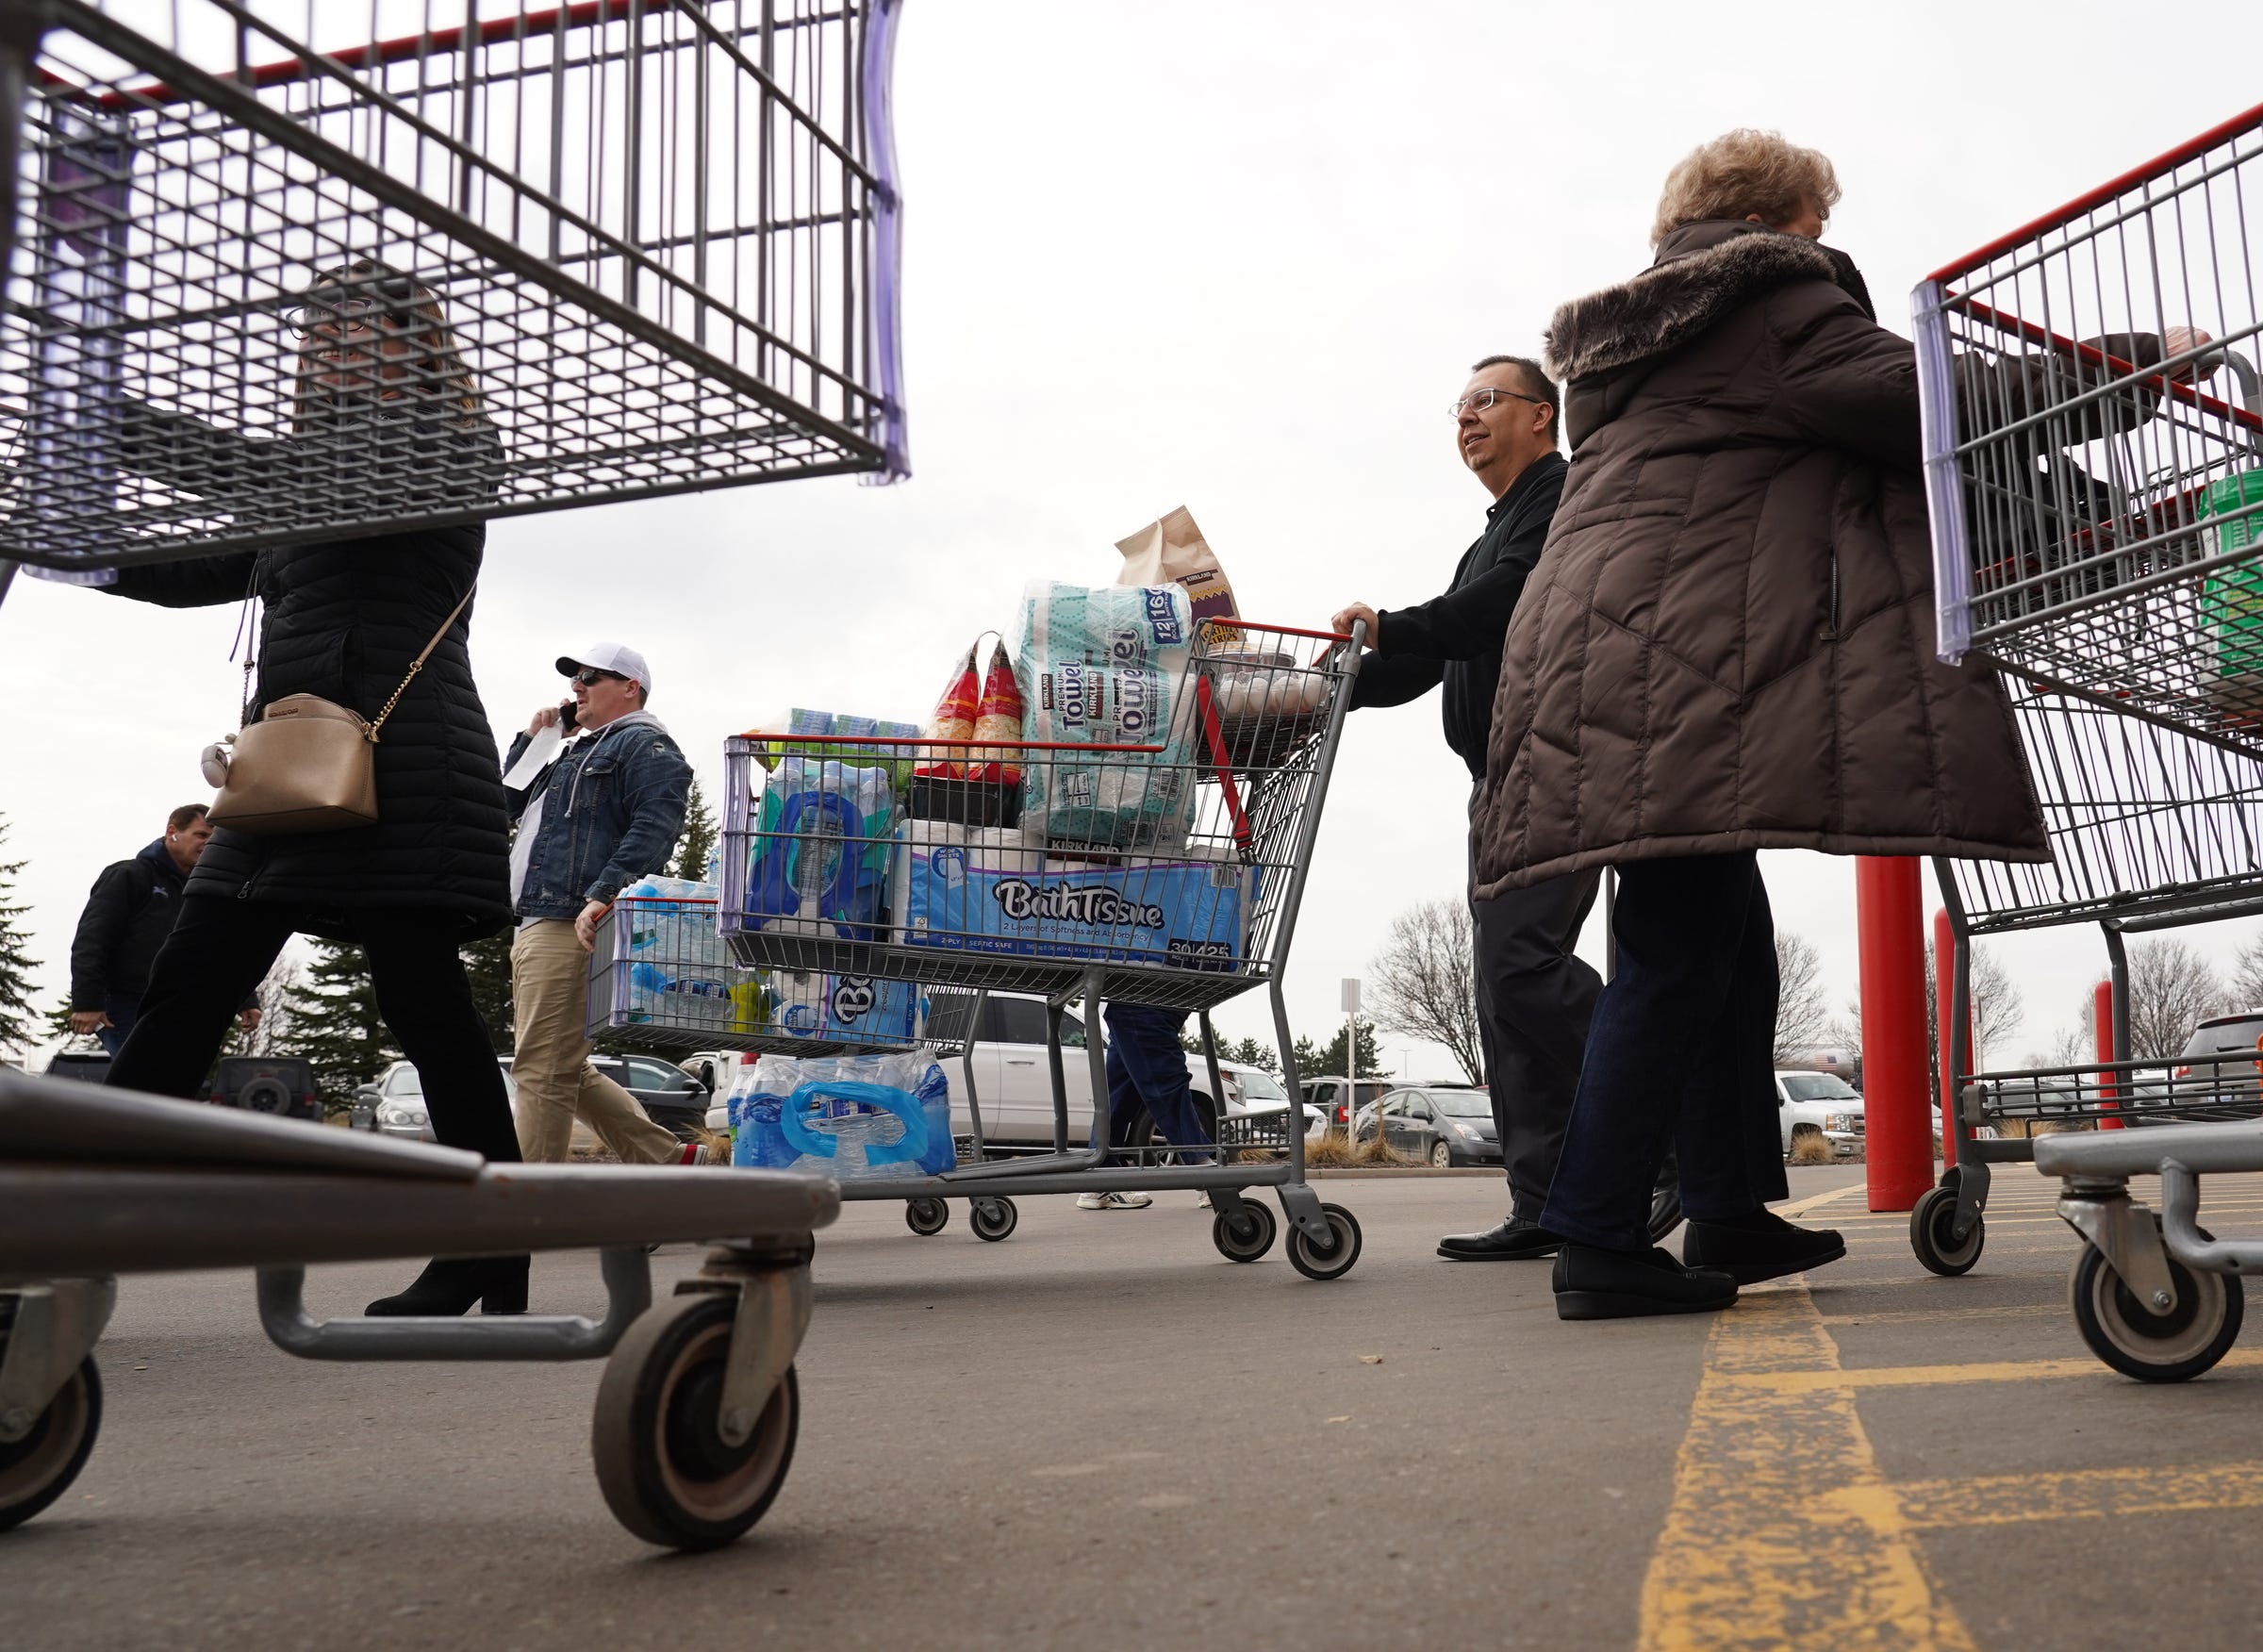 People grab supplies while shopping at Costco in Auburn Hills on Wednesday, March 11, 2020. Toilet paper, paper towels and disinfectants were in short supply during the early days of the coronavirus pandemic.